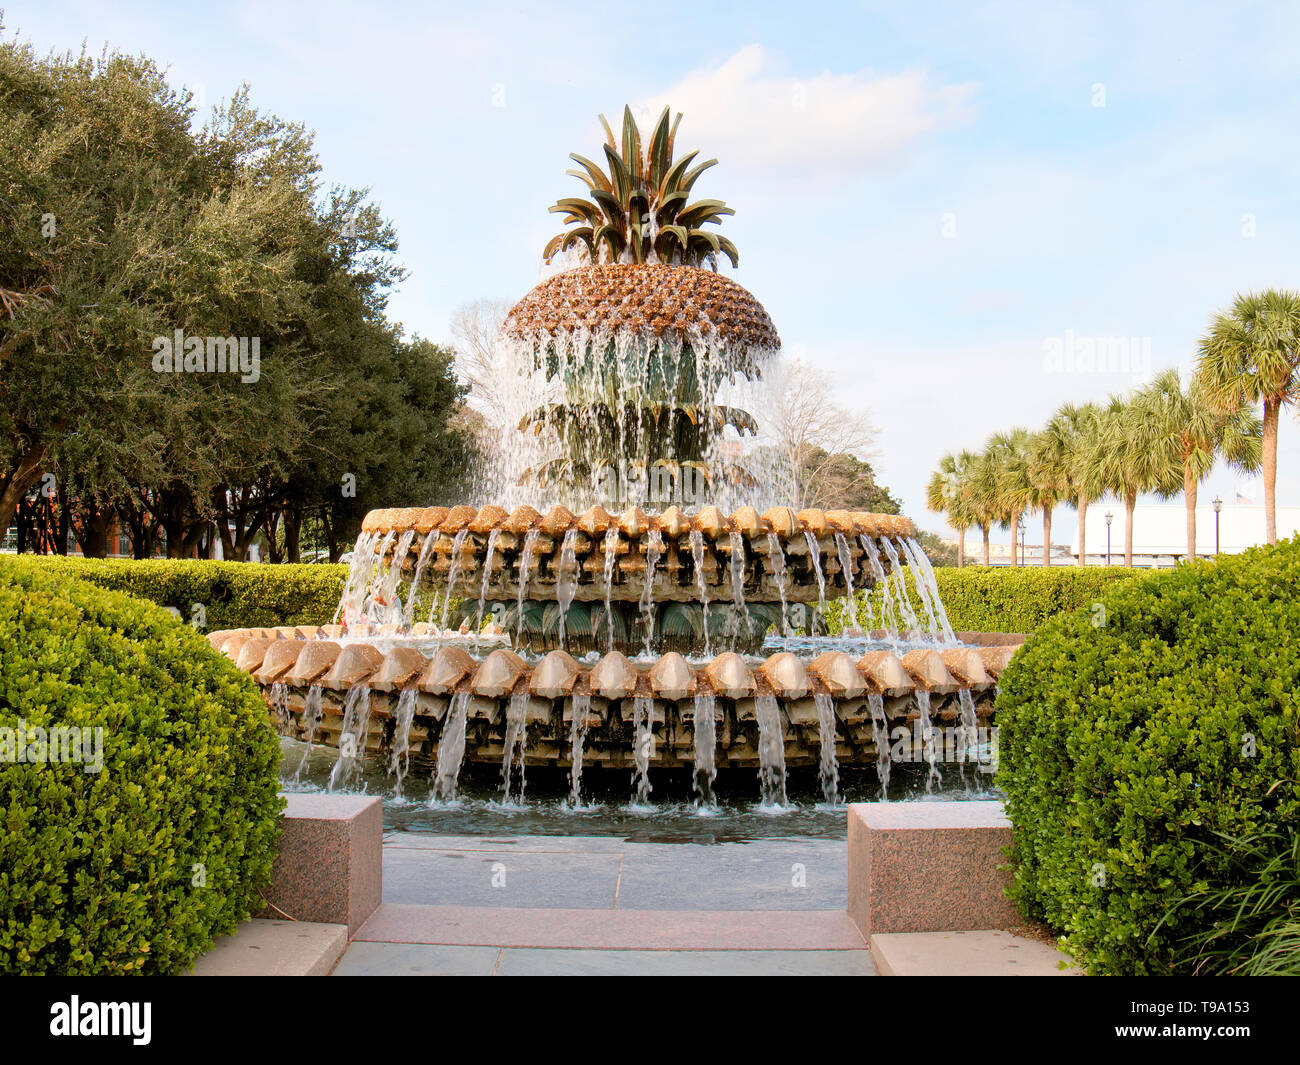 Pineapple Fountain In Waterfront Park Charleston, South Carolina, USA. Opened in 1990. Stock Photo